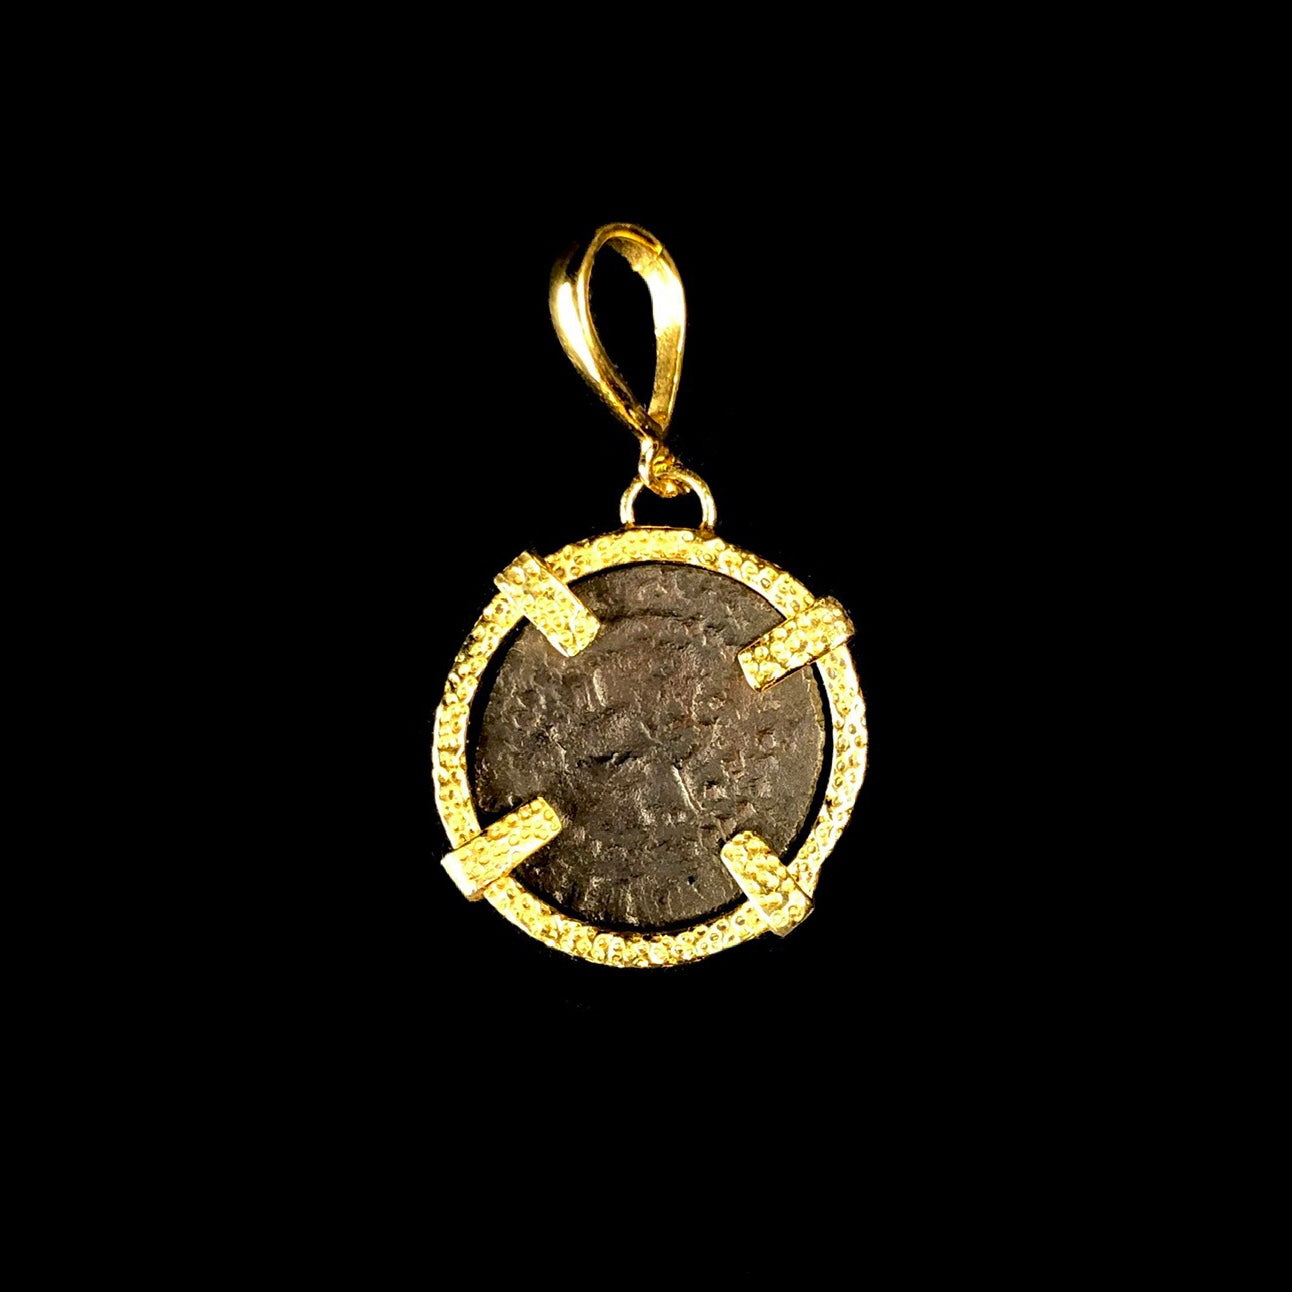 Bronze coin set in shining gold